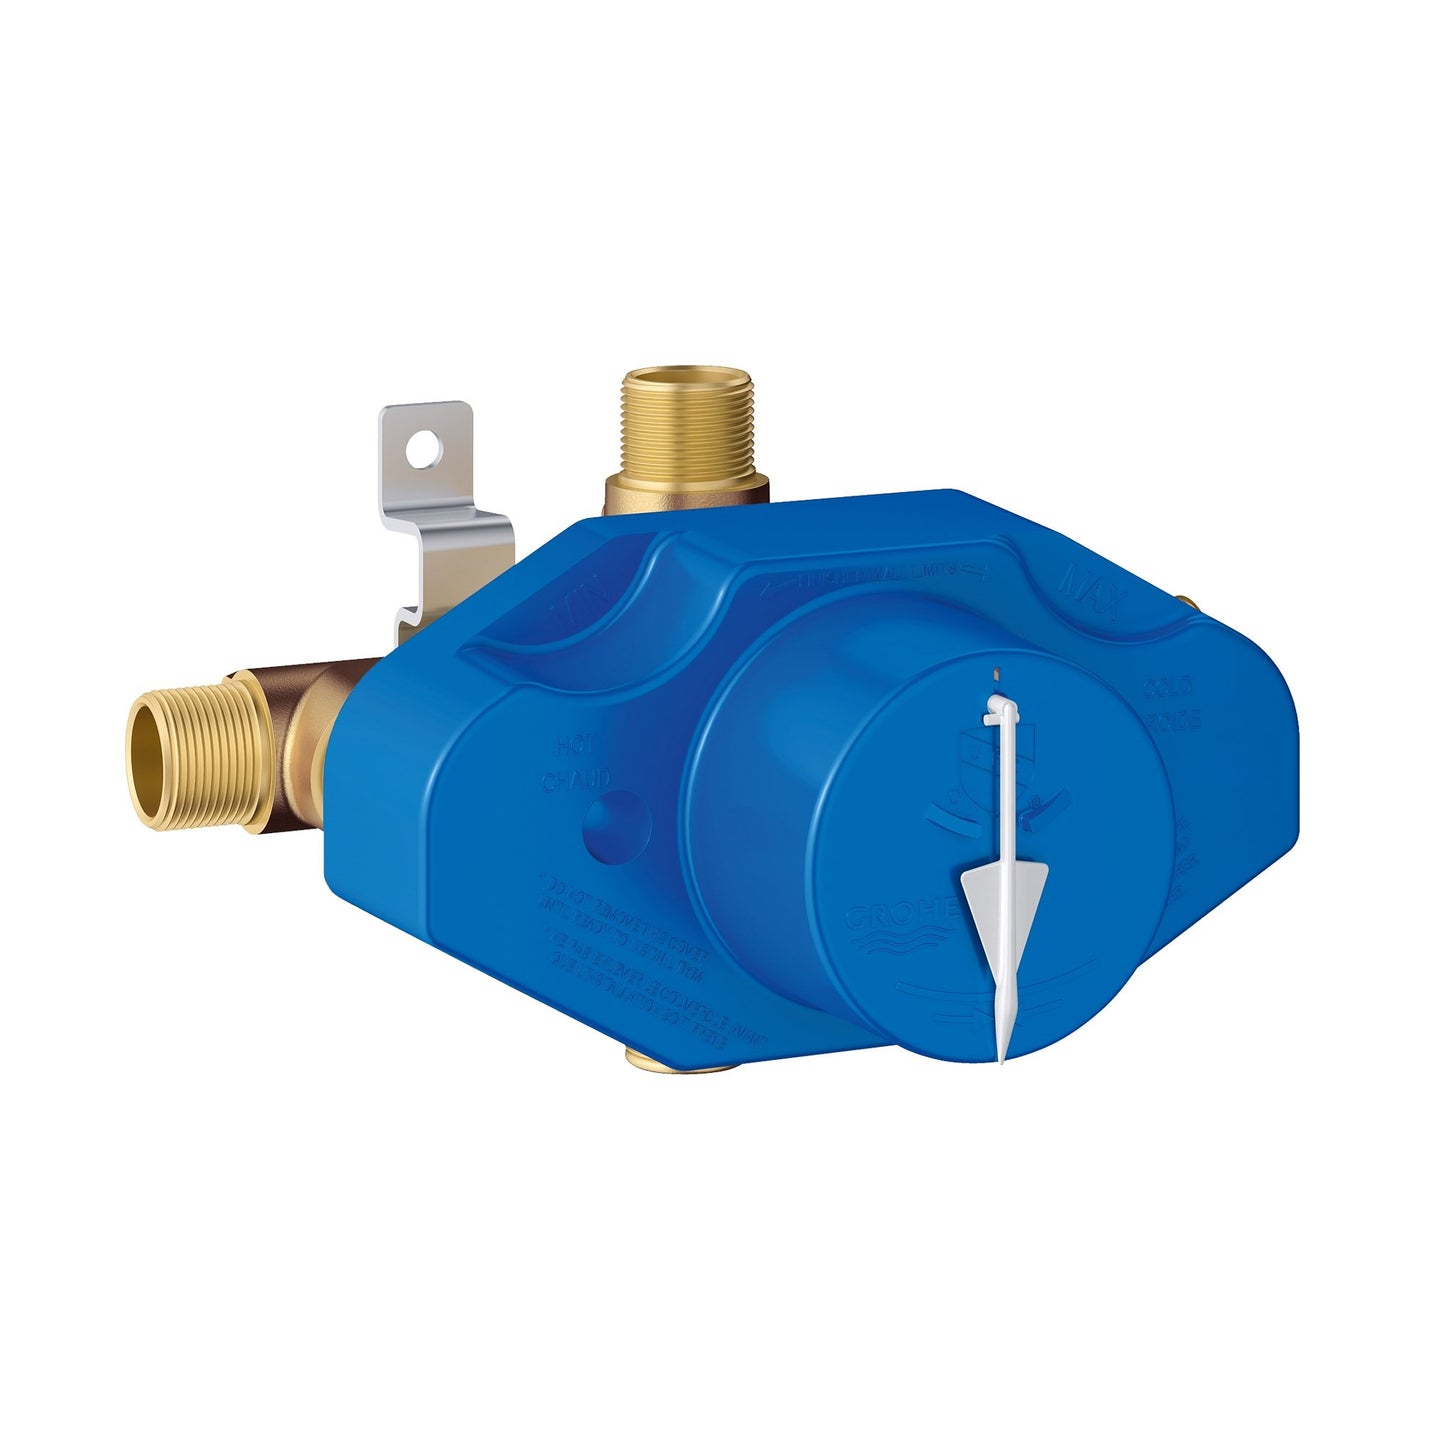 GROHE 35015001 Grohsafe Universal Pressure Balance Rough-In Valve, Blue